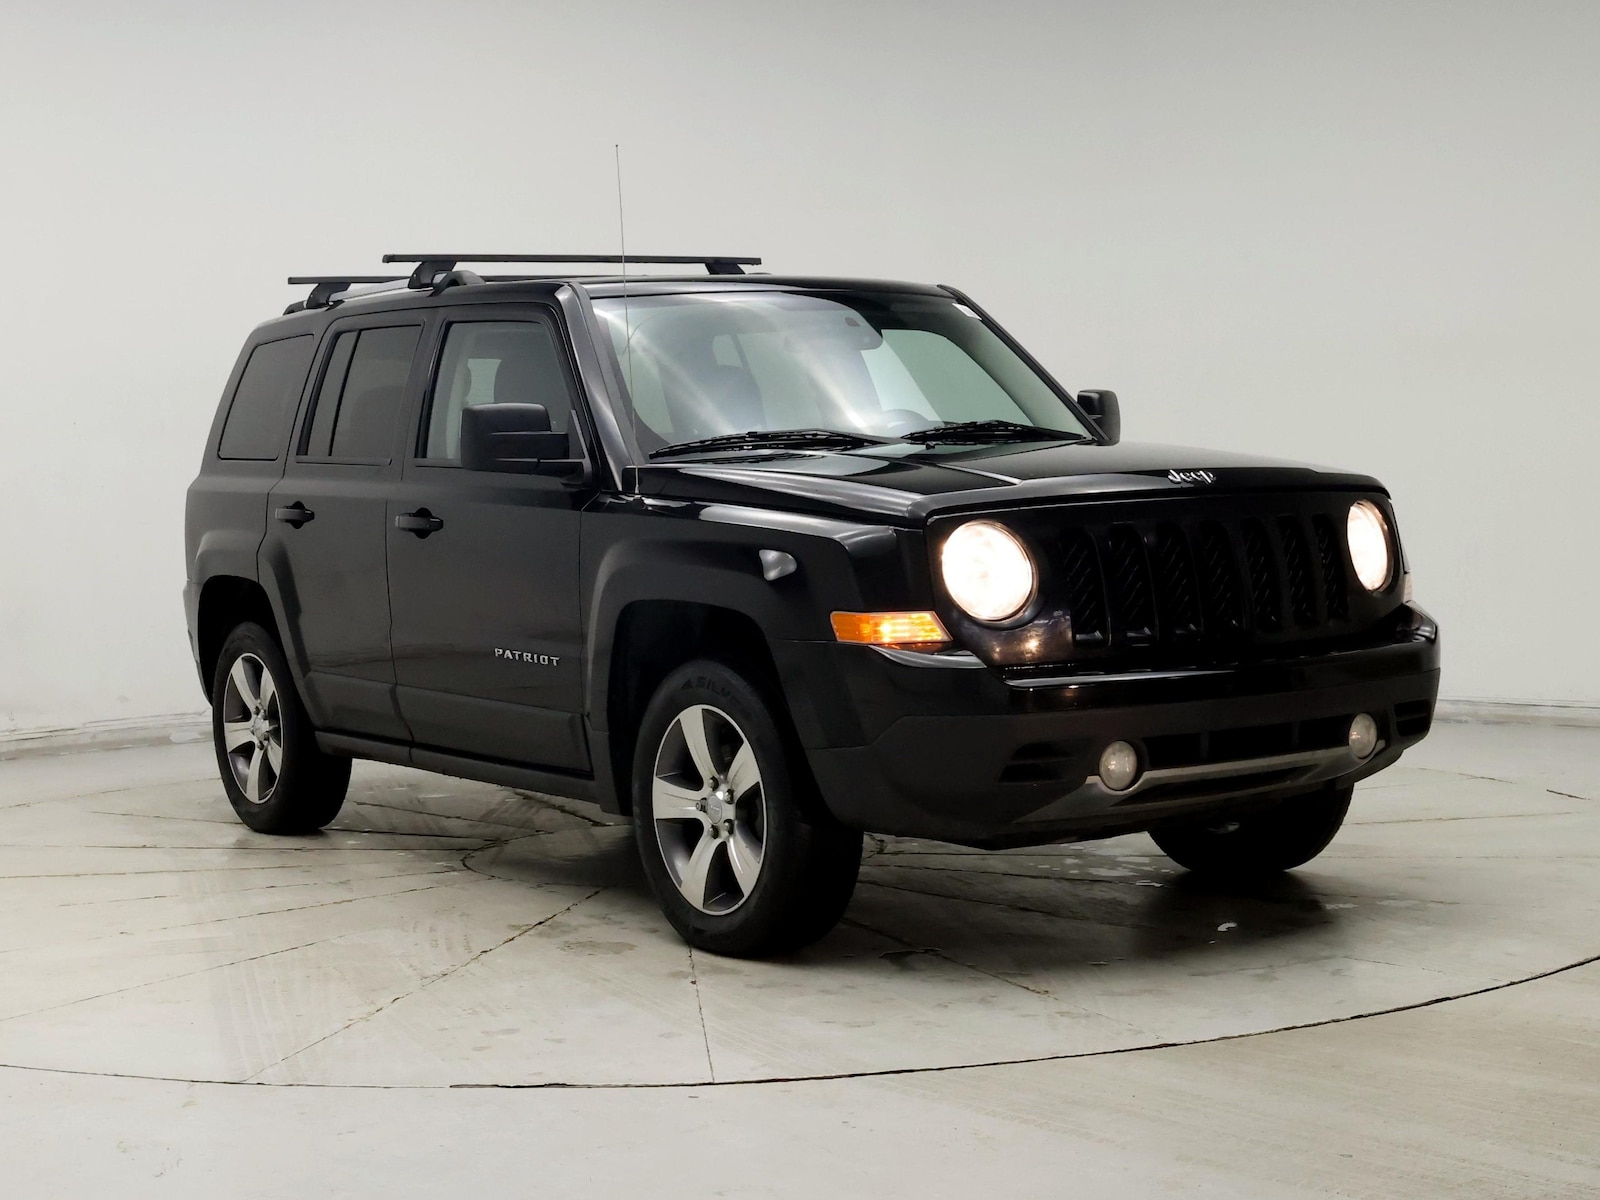 Used 2016 Jeep Patriot Latitude with VIN 1C4NJRFB7GD809661 for sale in Spokane Valley, WA